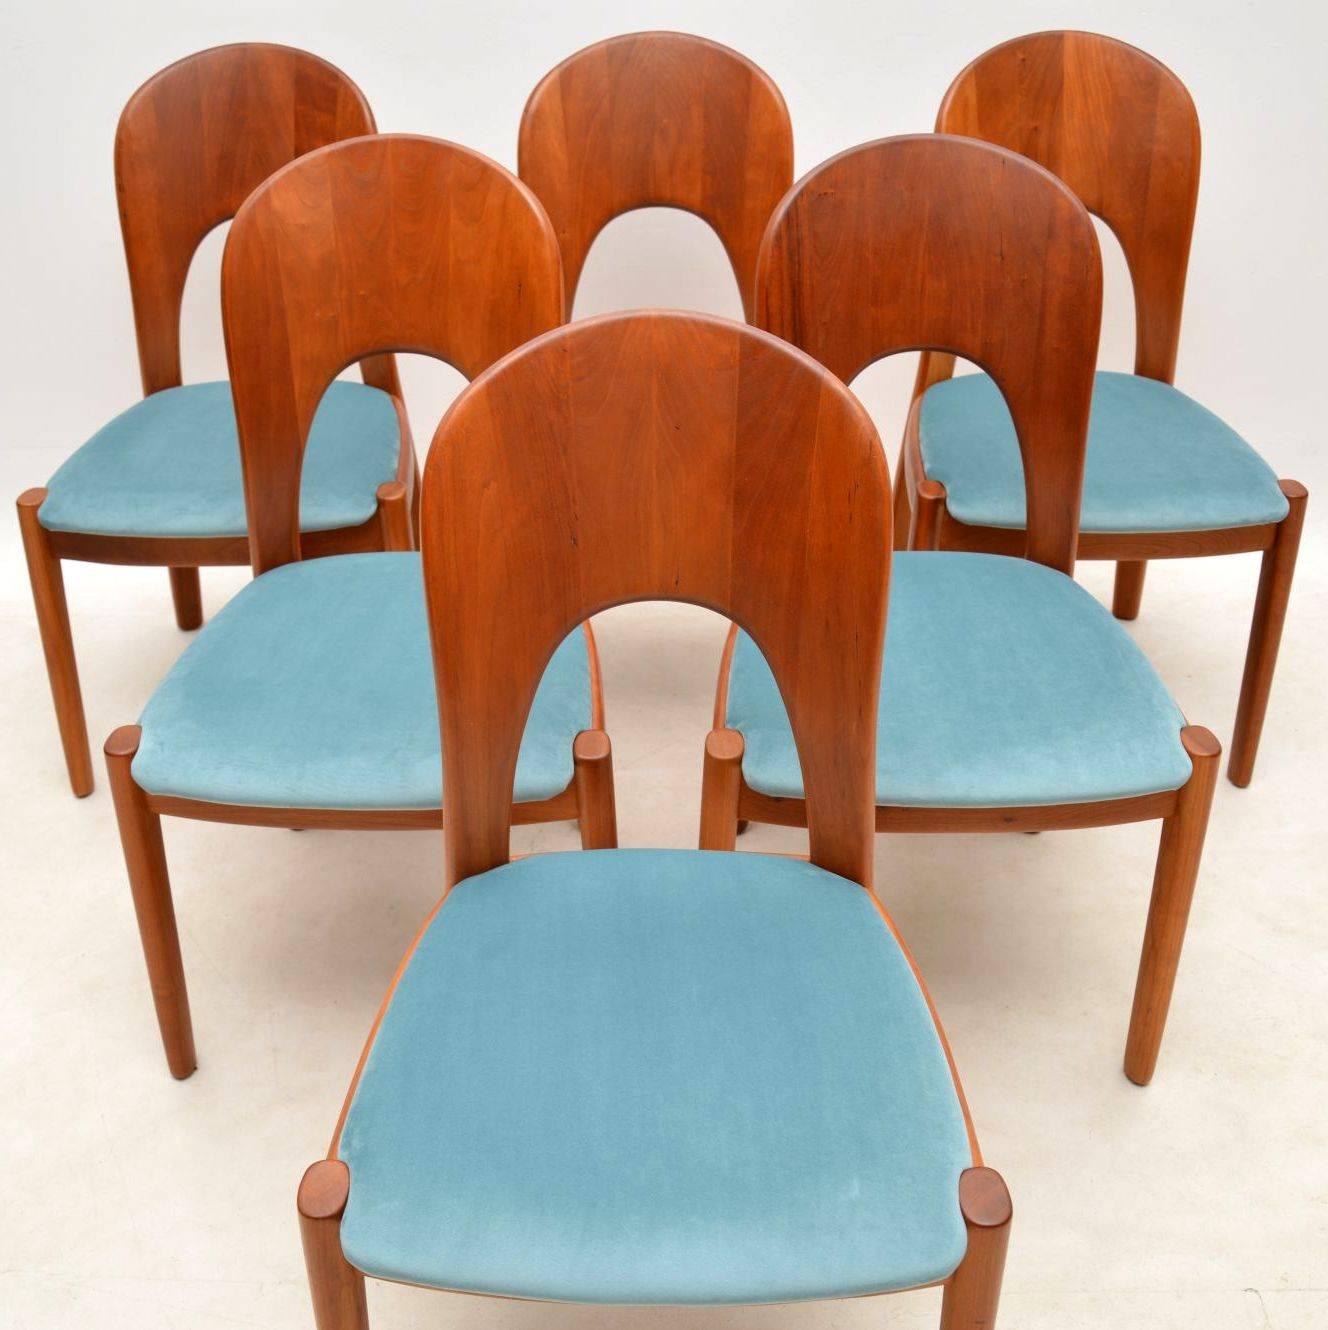 1960s Danish Teak Dining Table and Chairs by Niels Koefoed 3